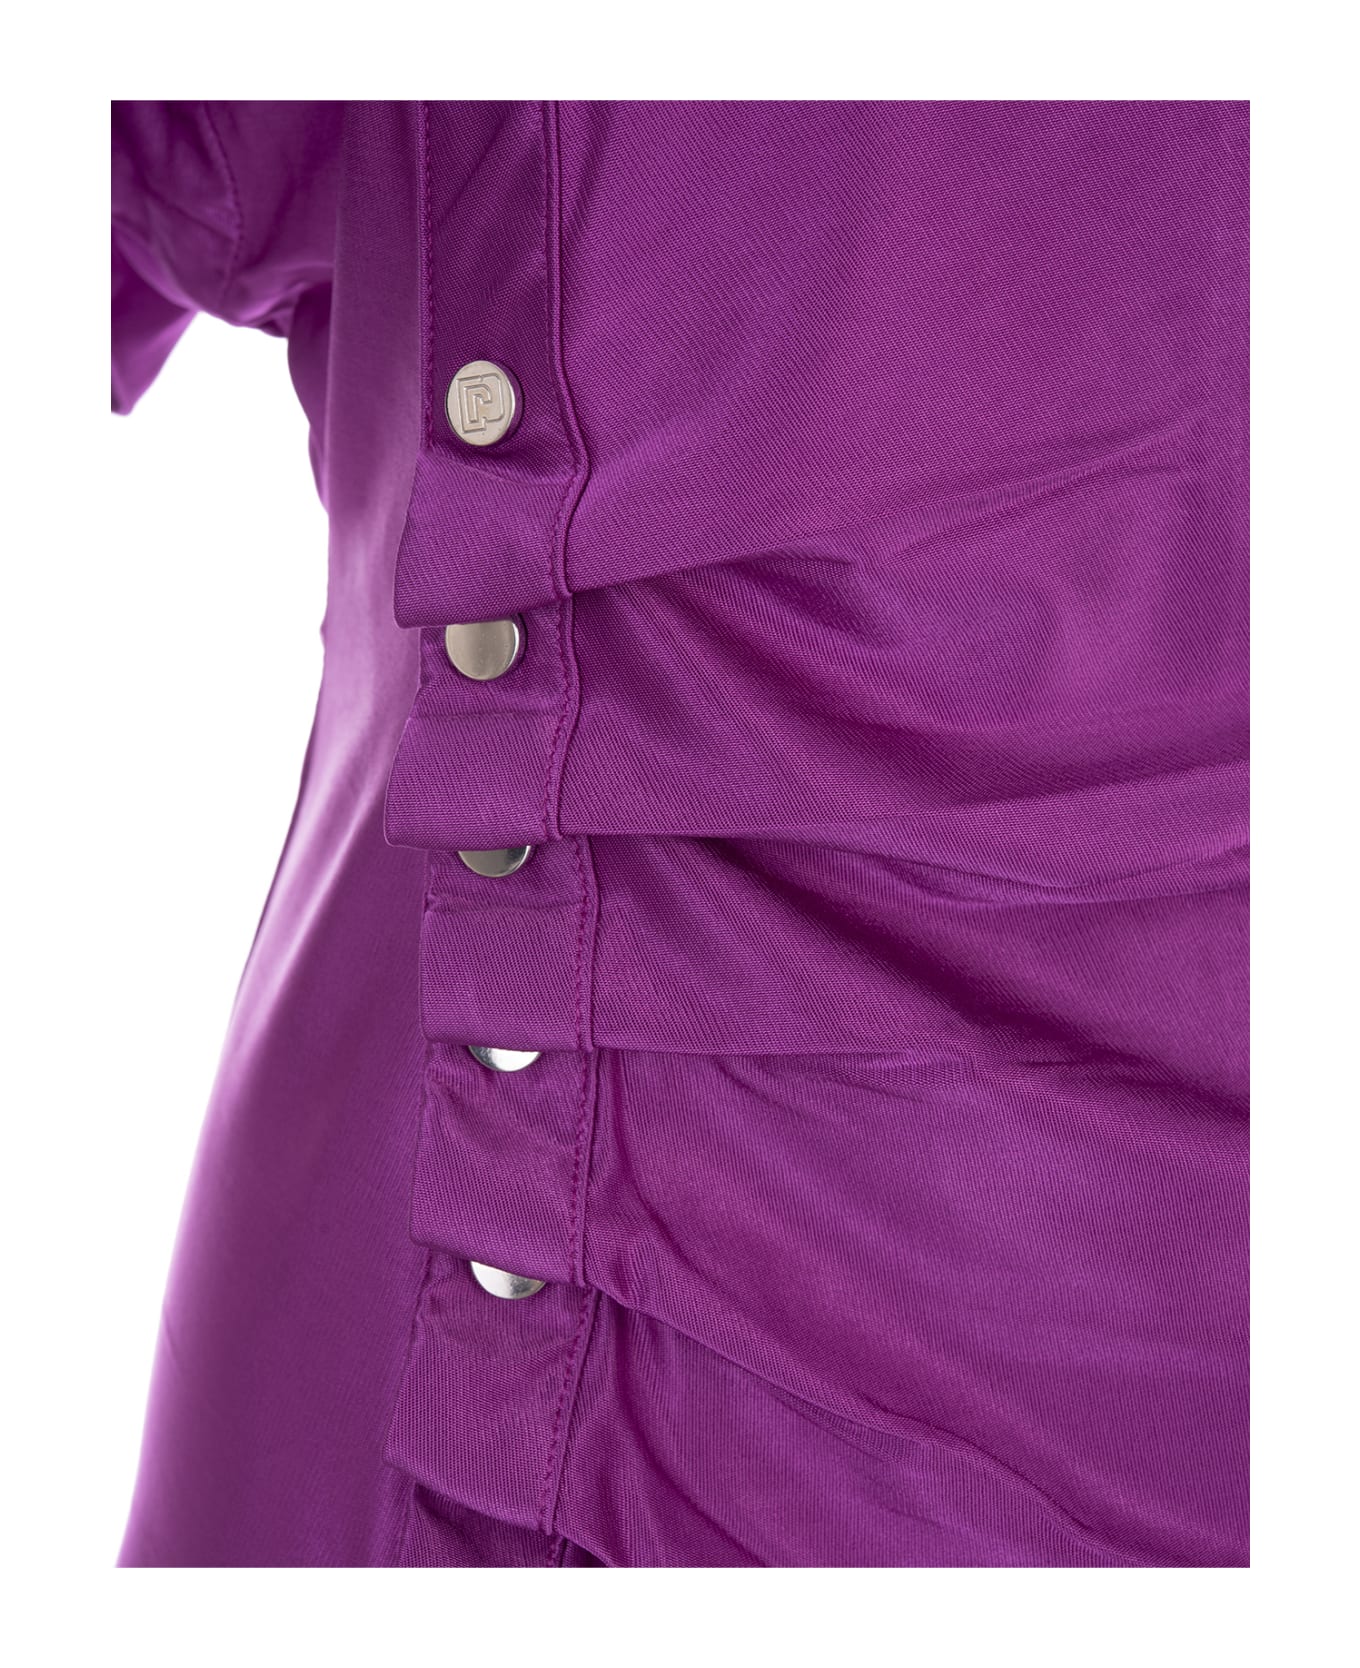 Paco Rabanne Purple Top With Draping And Buttons - Purple トップス